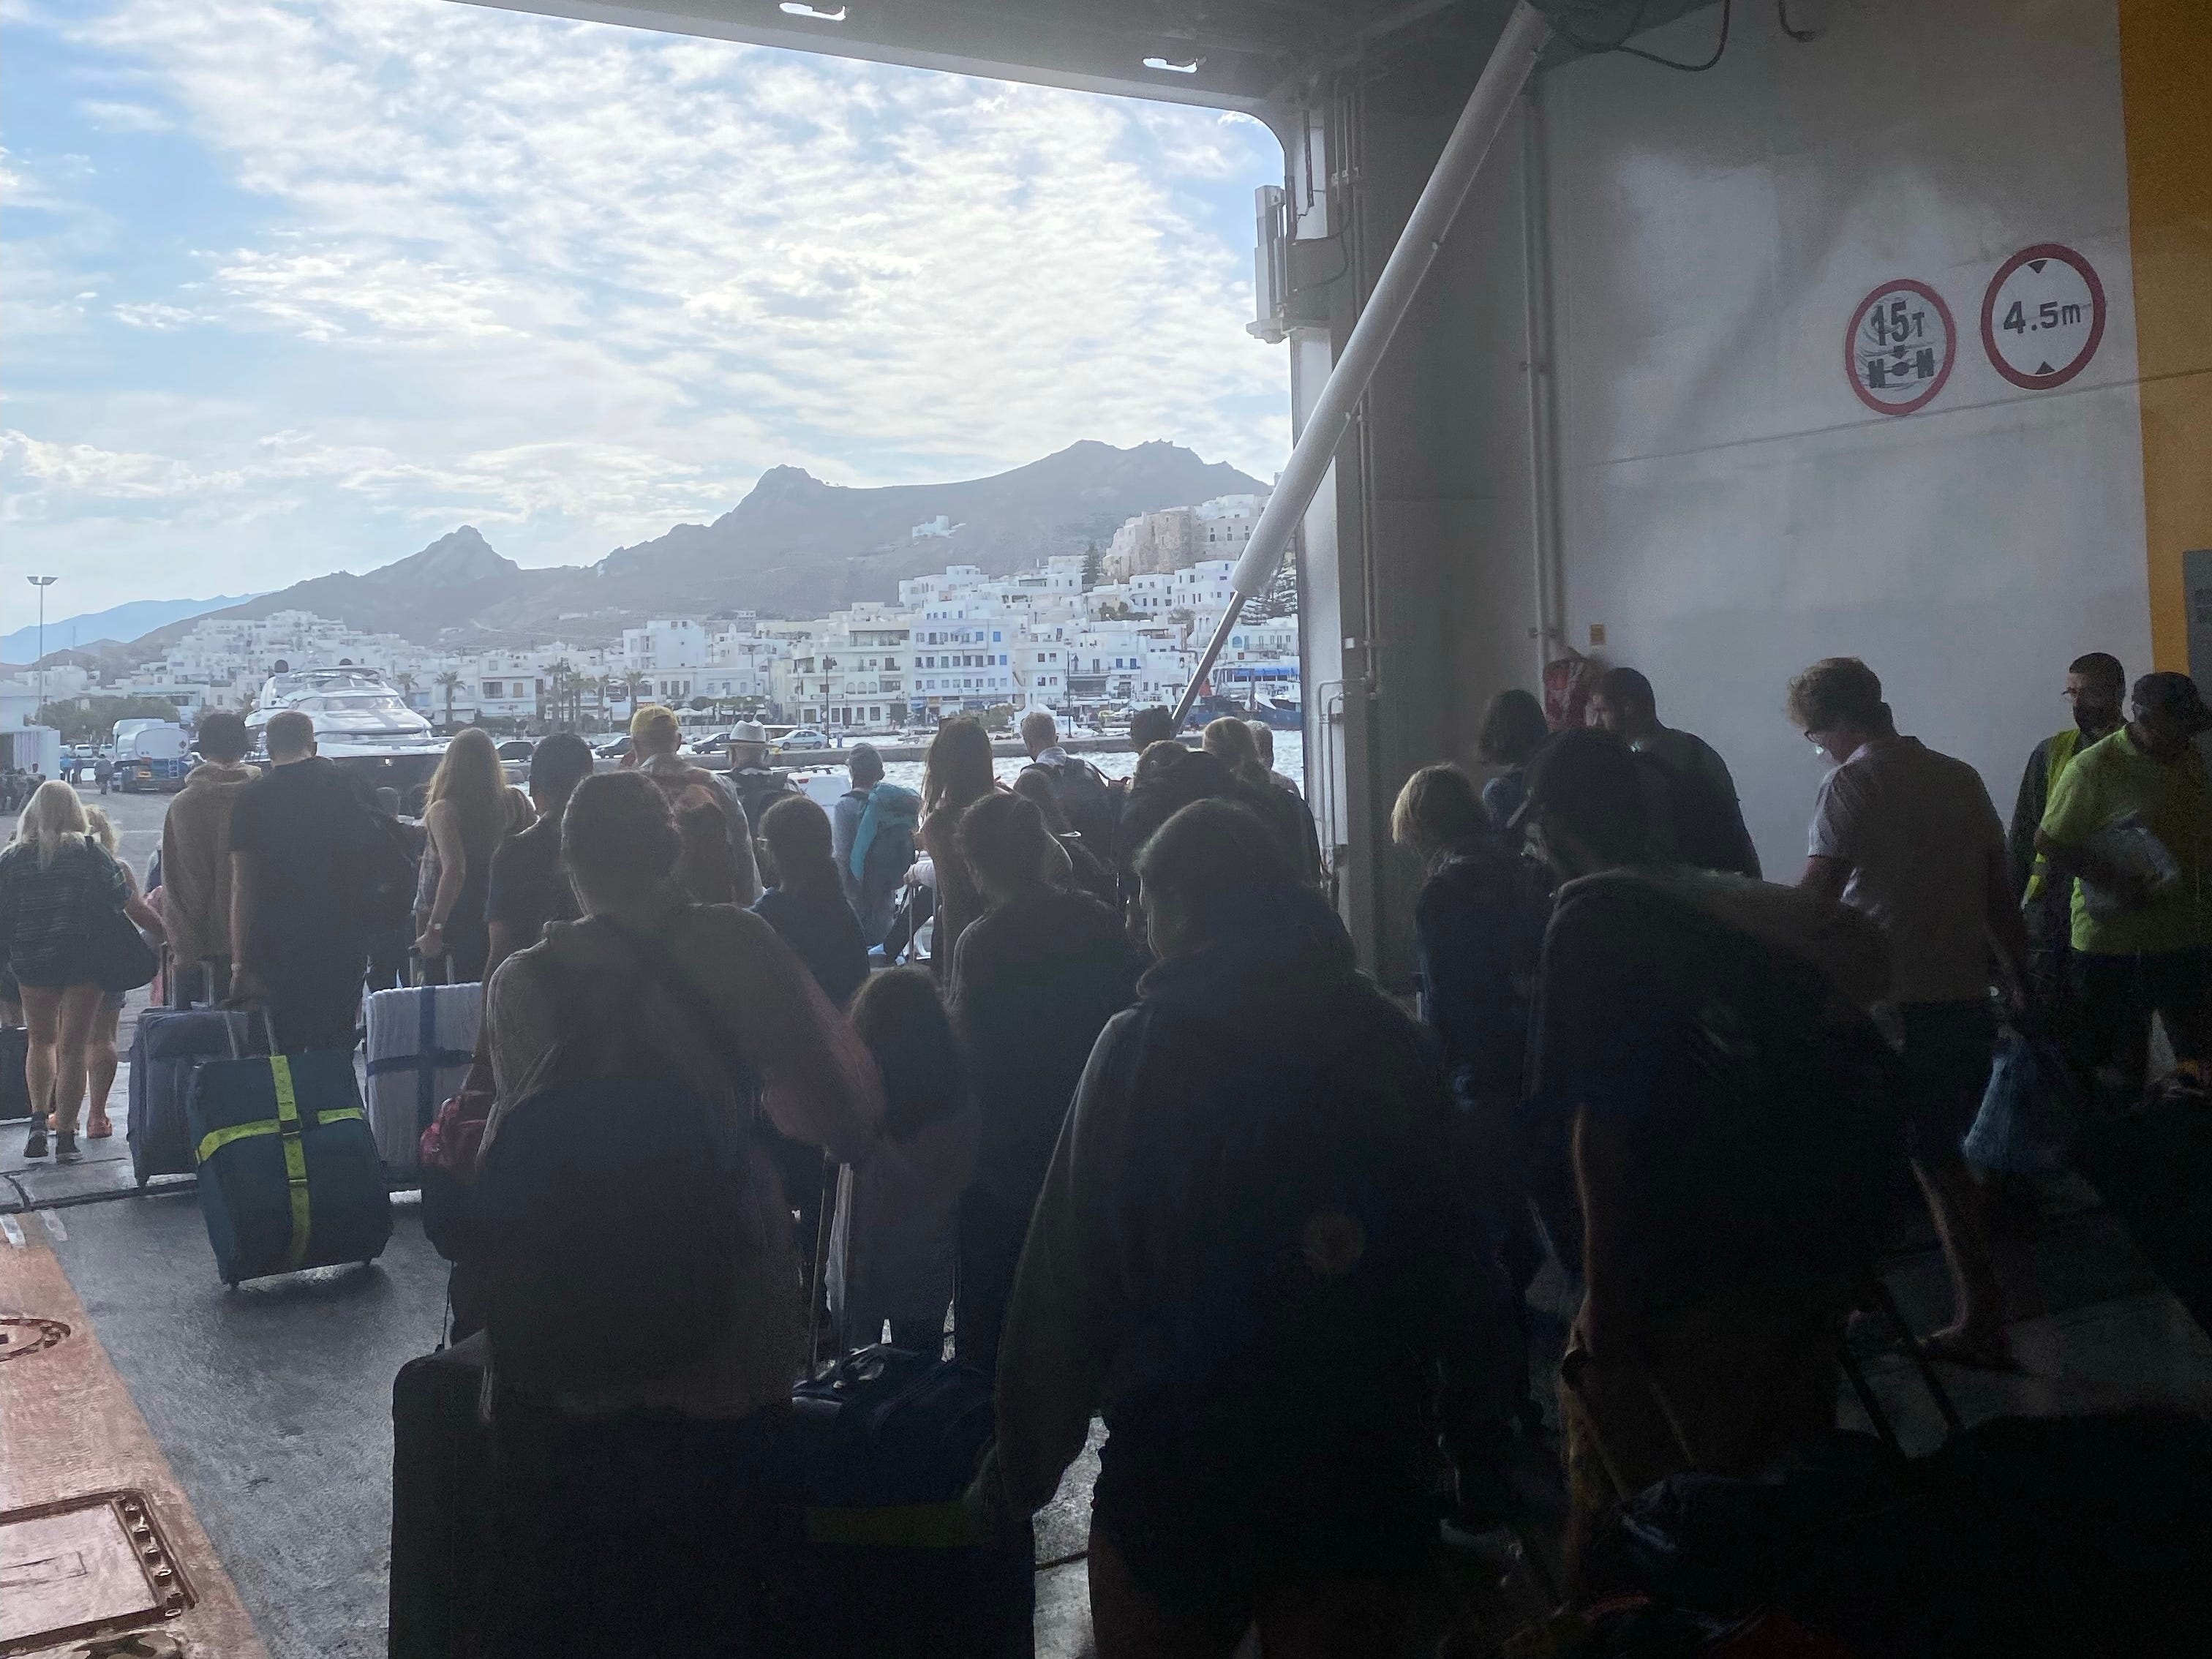 <p>We optimized our time by booking early <a href="https://www.businessinsider.com/overnight-ferry-ride-without-cabin-worth-it-hurtigruten-norway-2023-8">ferry rides</a> on travel days.</p><p>But the ferries were crowded<em>, </em>so I wish we paid a little more to upgrade to bigger, more nap-friendly seats.</p>